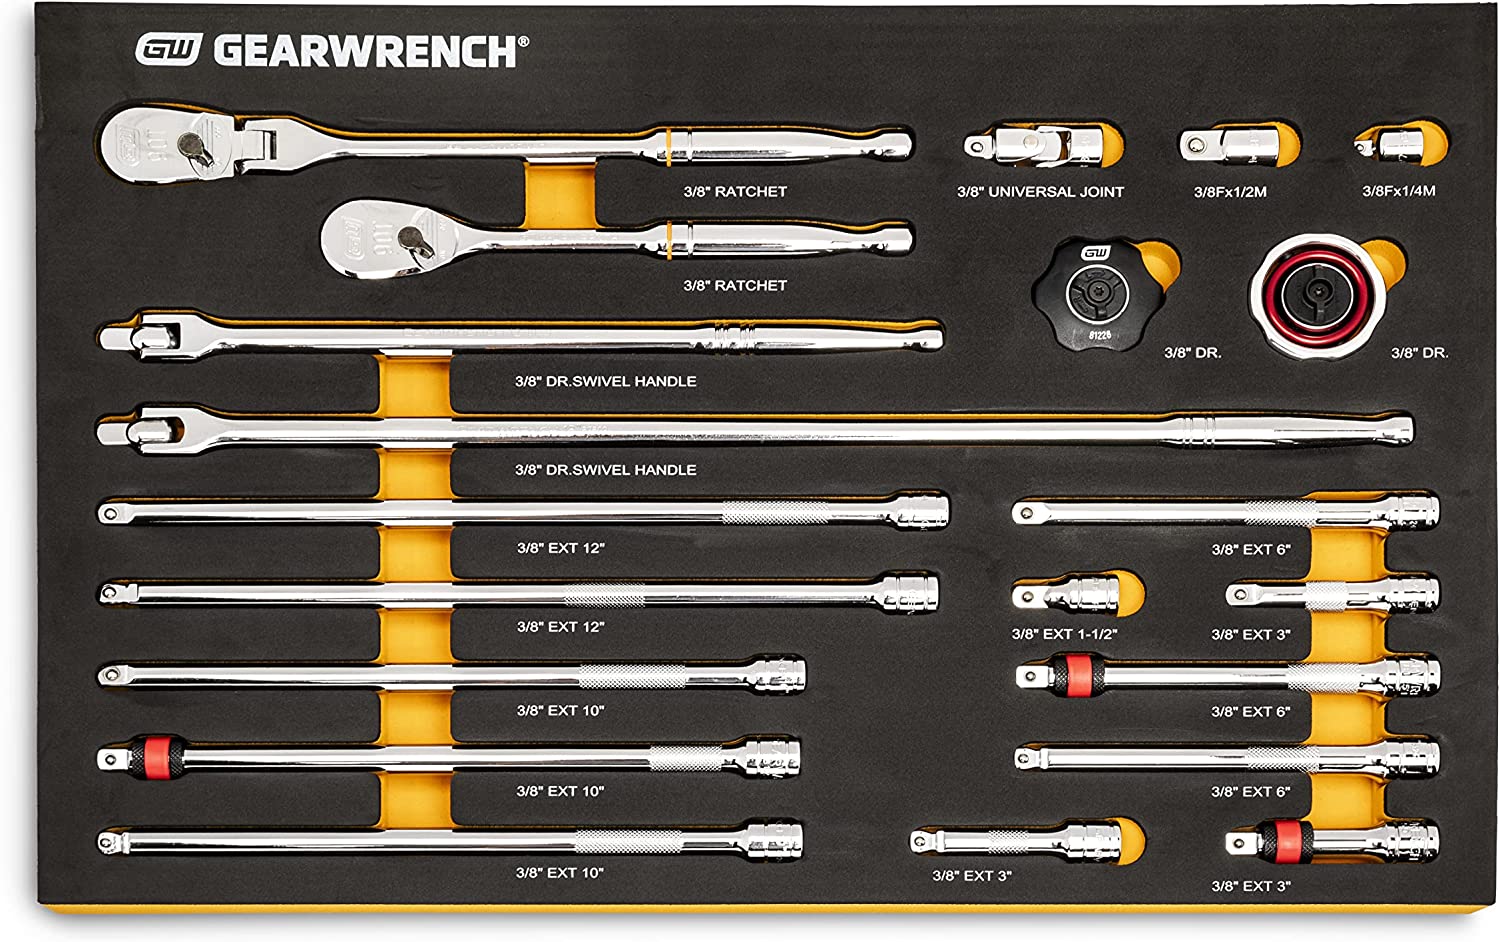 GearWrench 86521 21pc 3/8" 90-Tooth Ratchet & Drive Tool Set with EVA Foam Tray - MPR Tools & Equipment